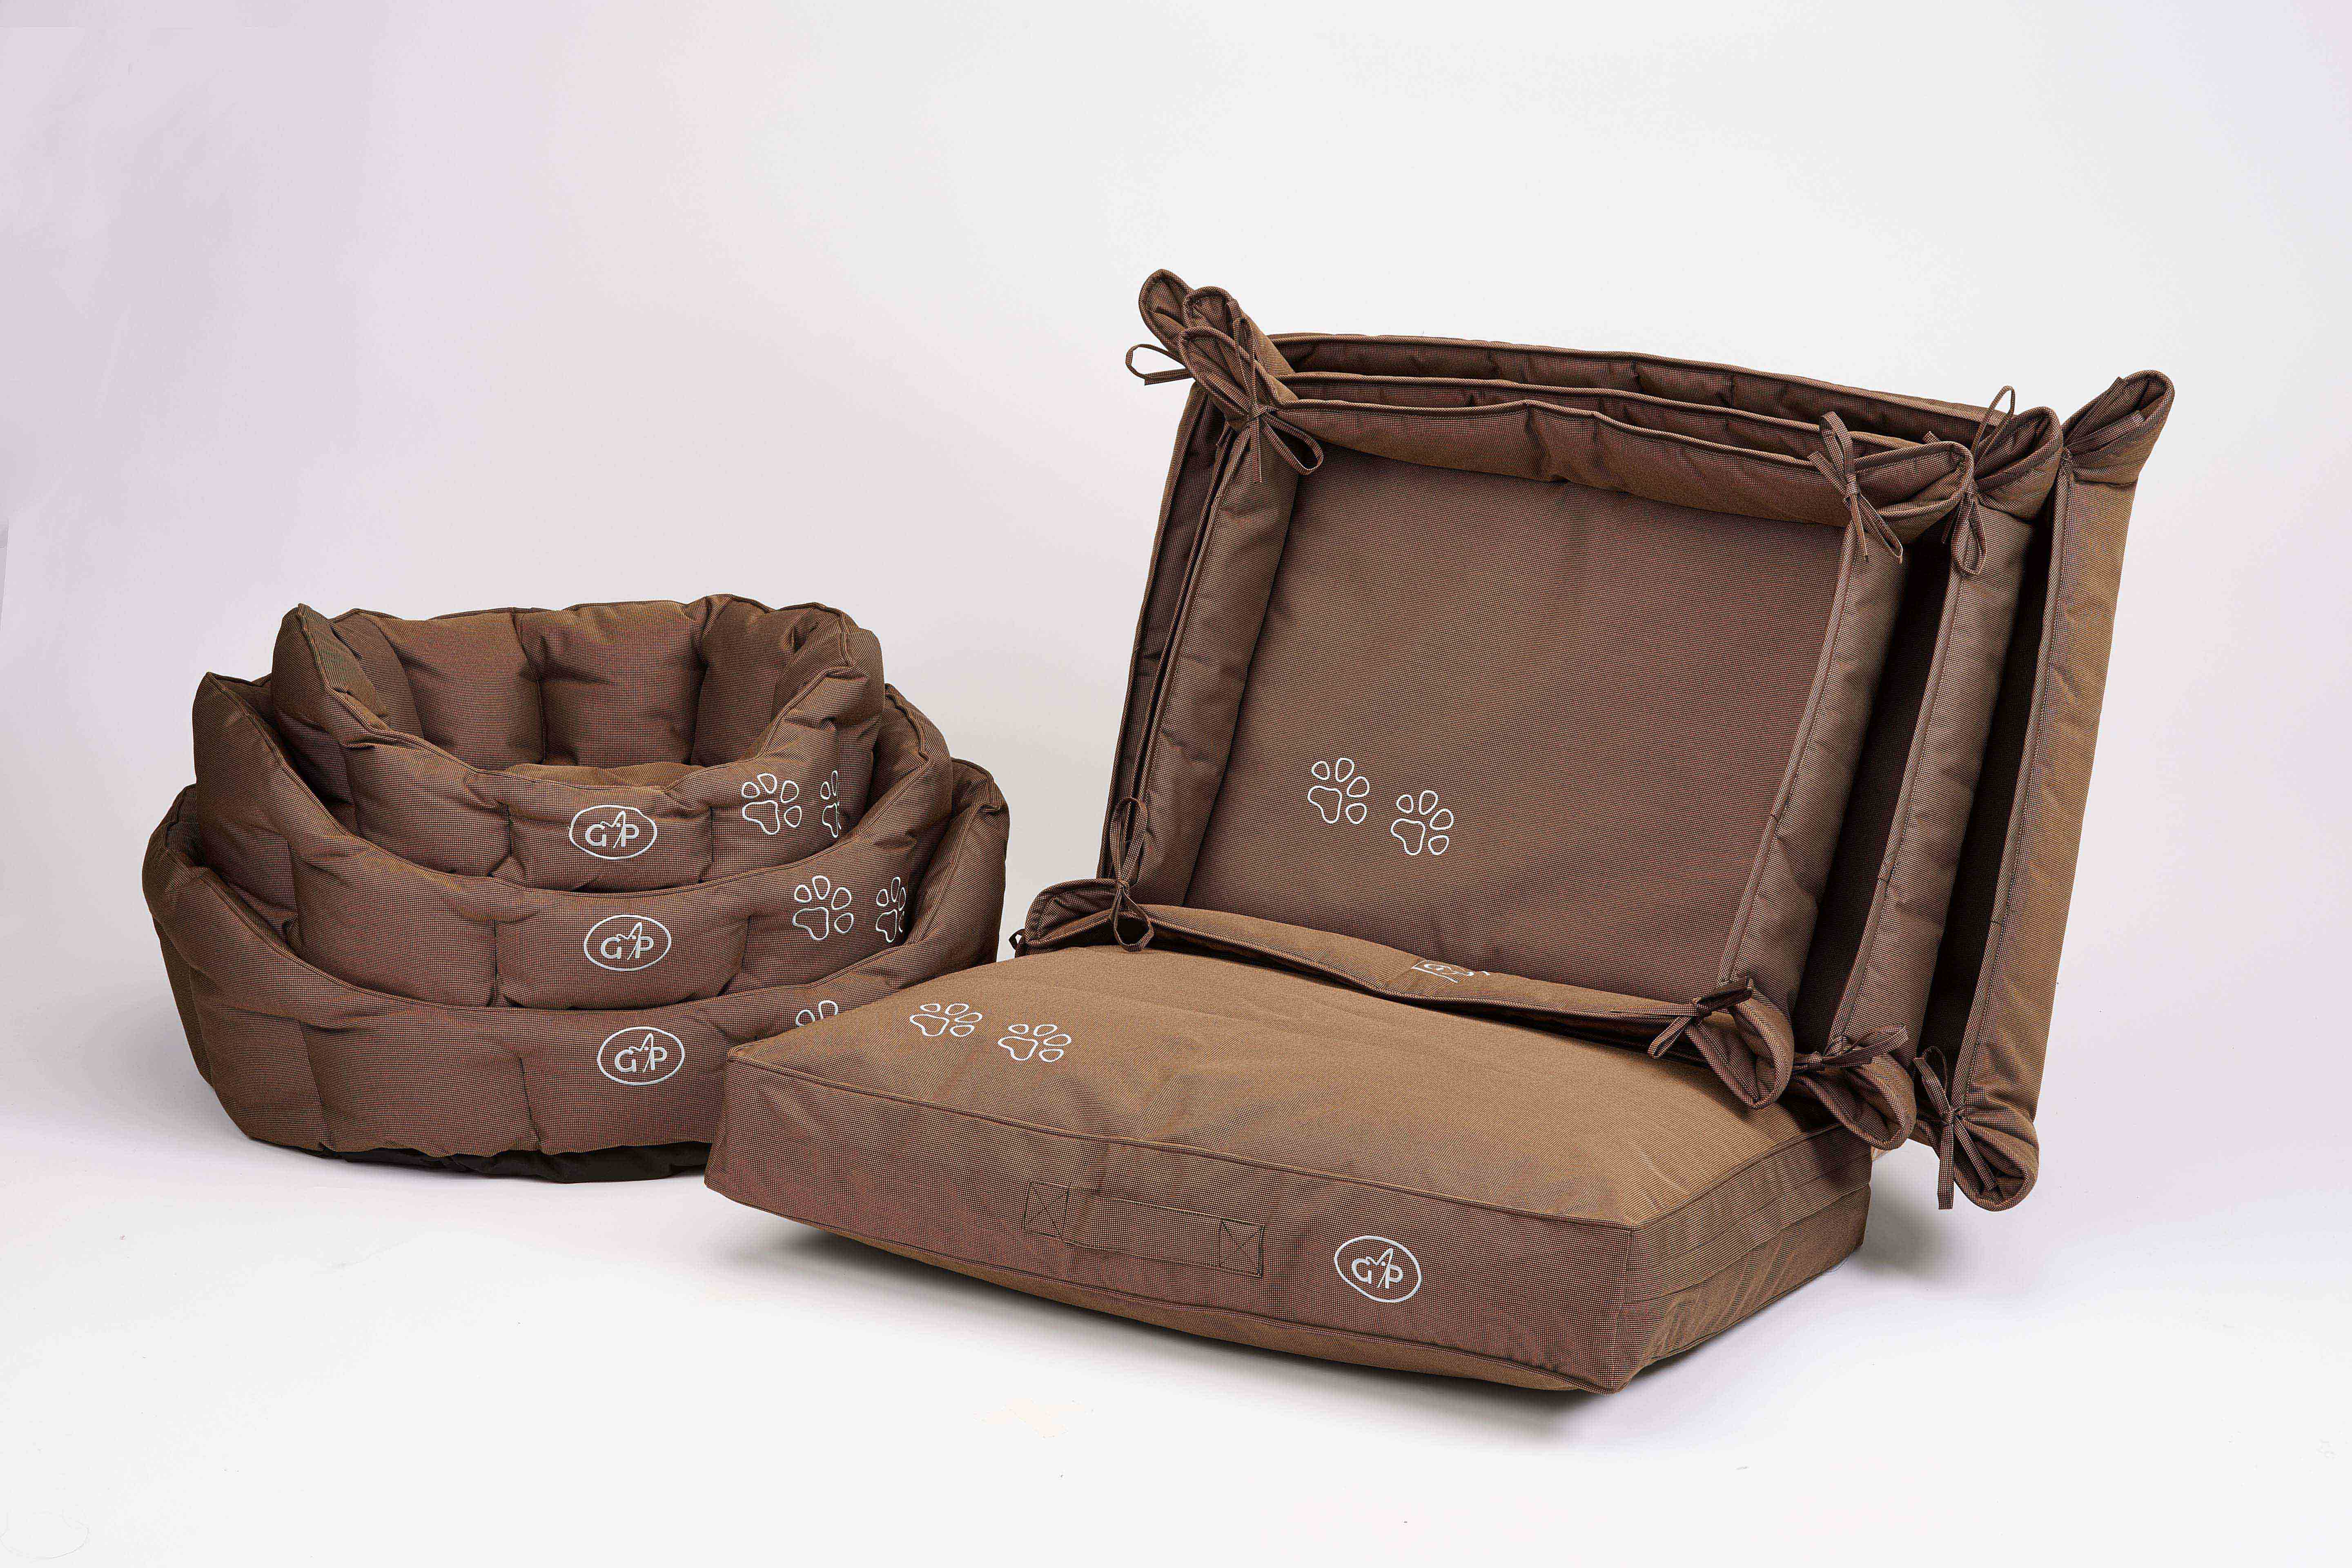 Gor Pets’ new range for muddy paws and the great outdoors header image